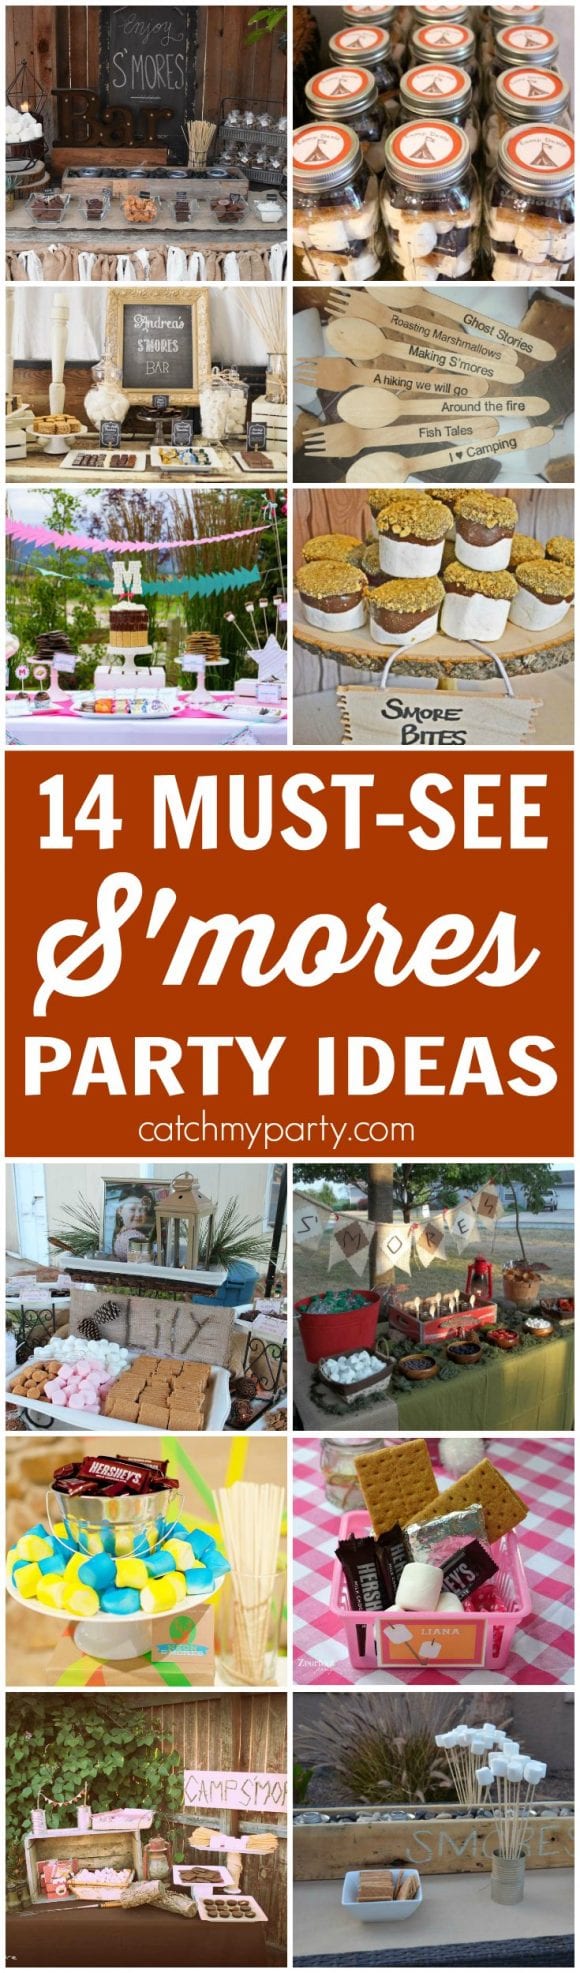 14 Must-See S'mores Party Ideas